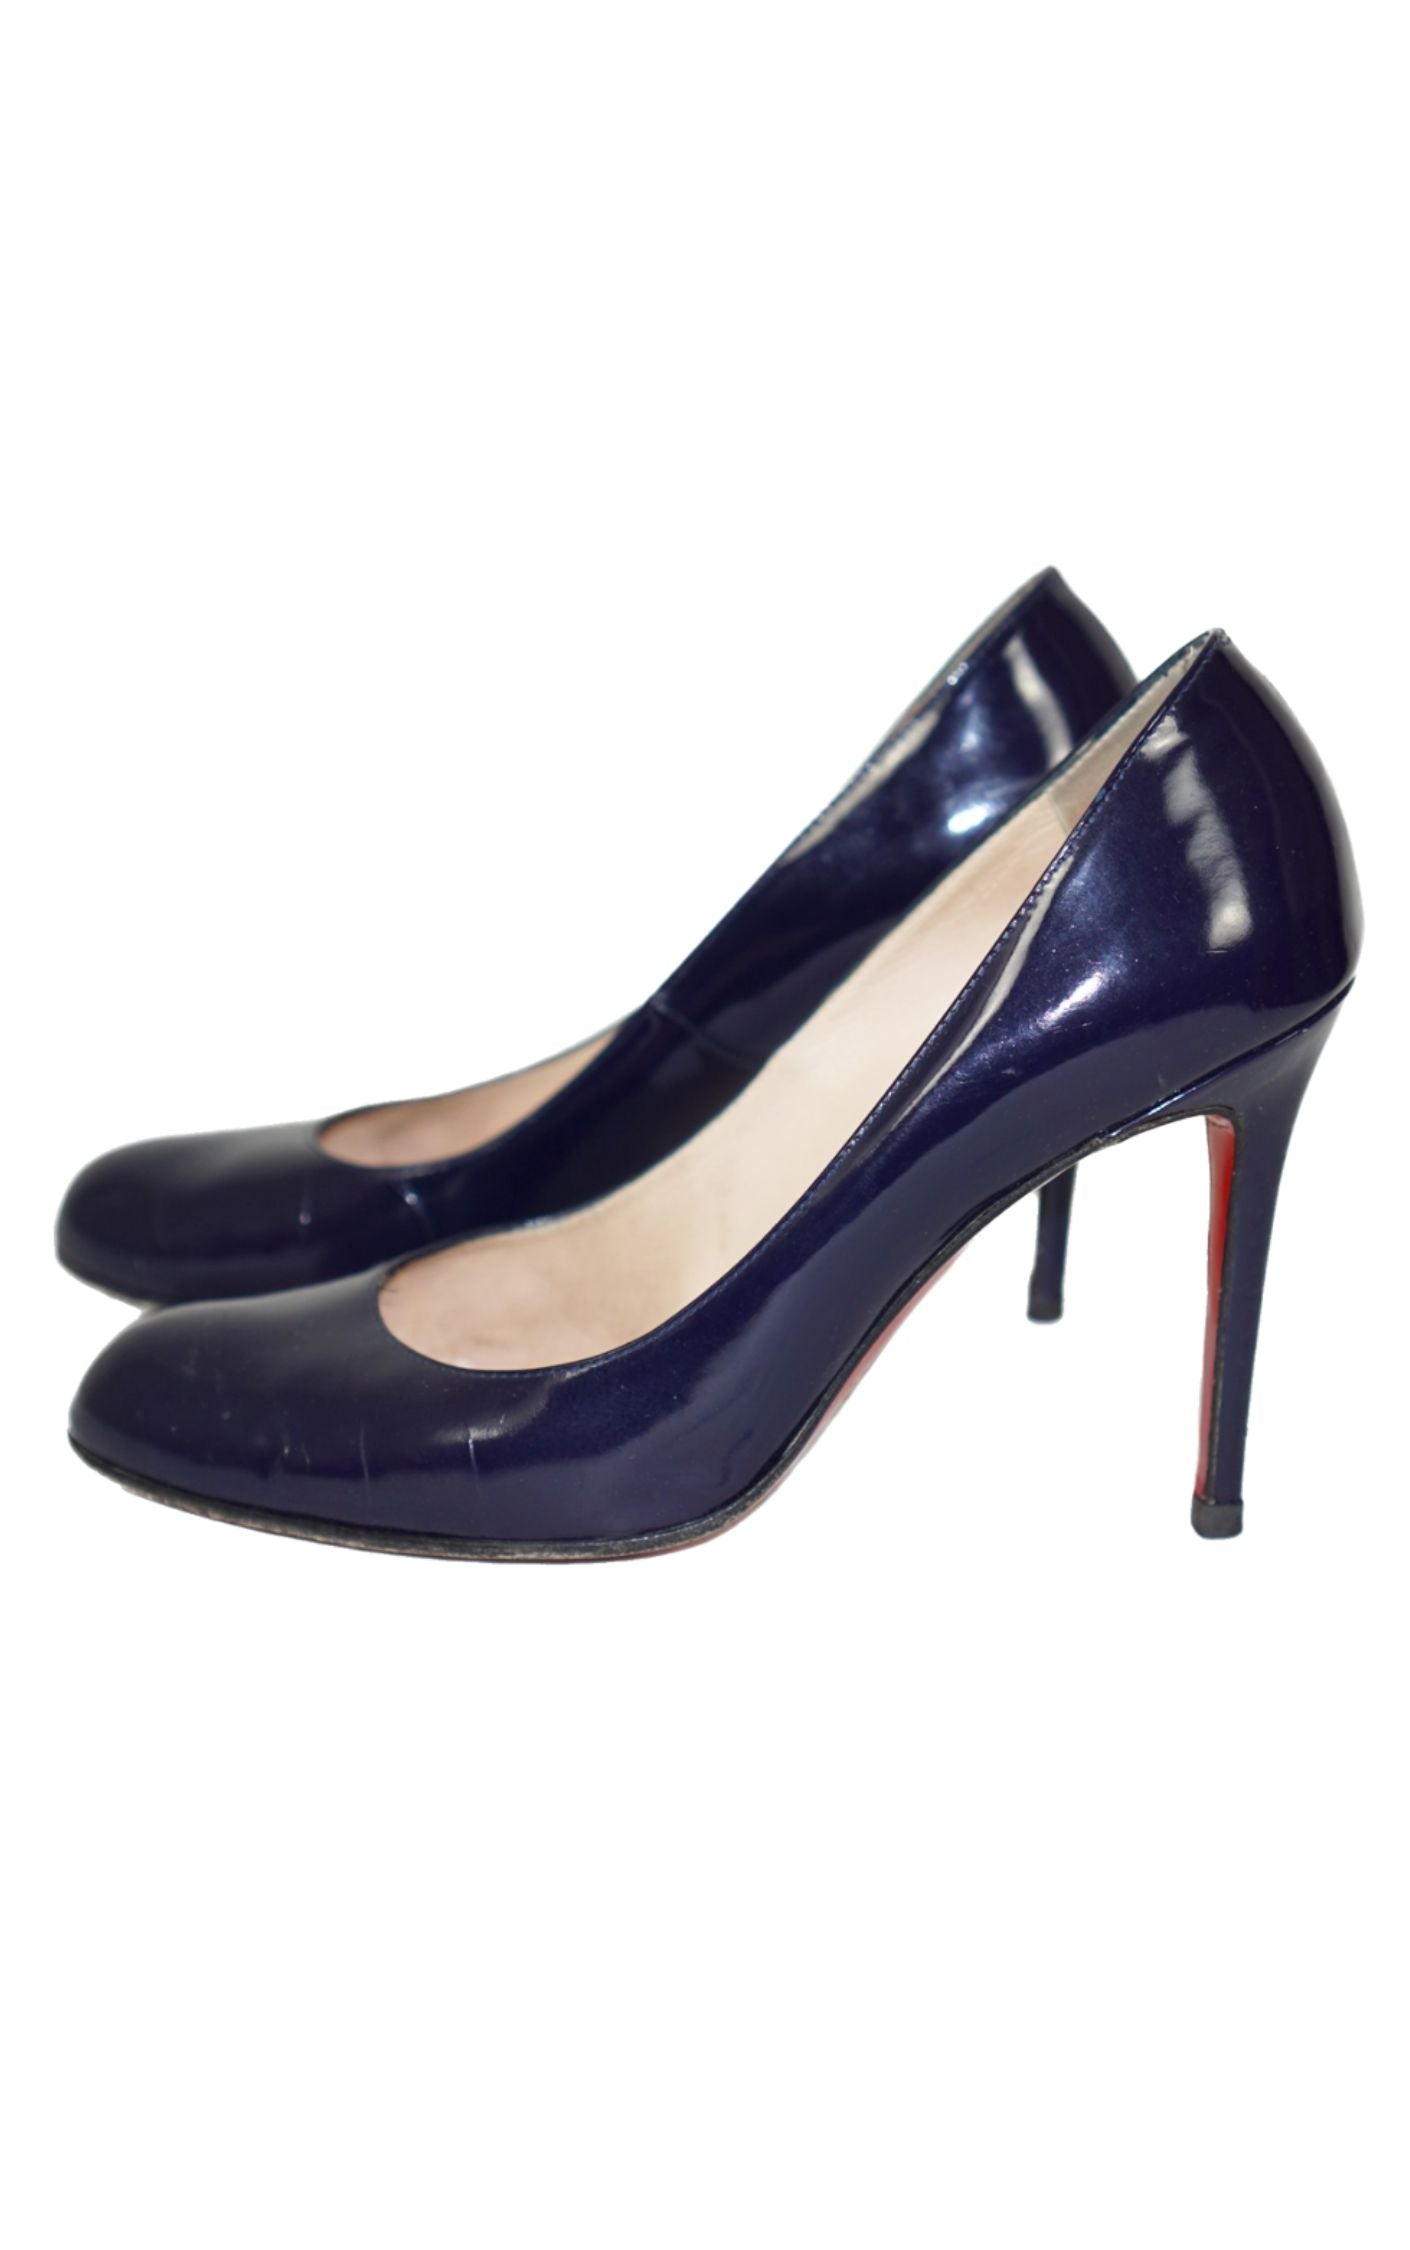 CHRISTIAN LOUBOUTIN Patent Leather Navy Simple Pumps resellum